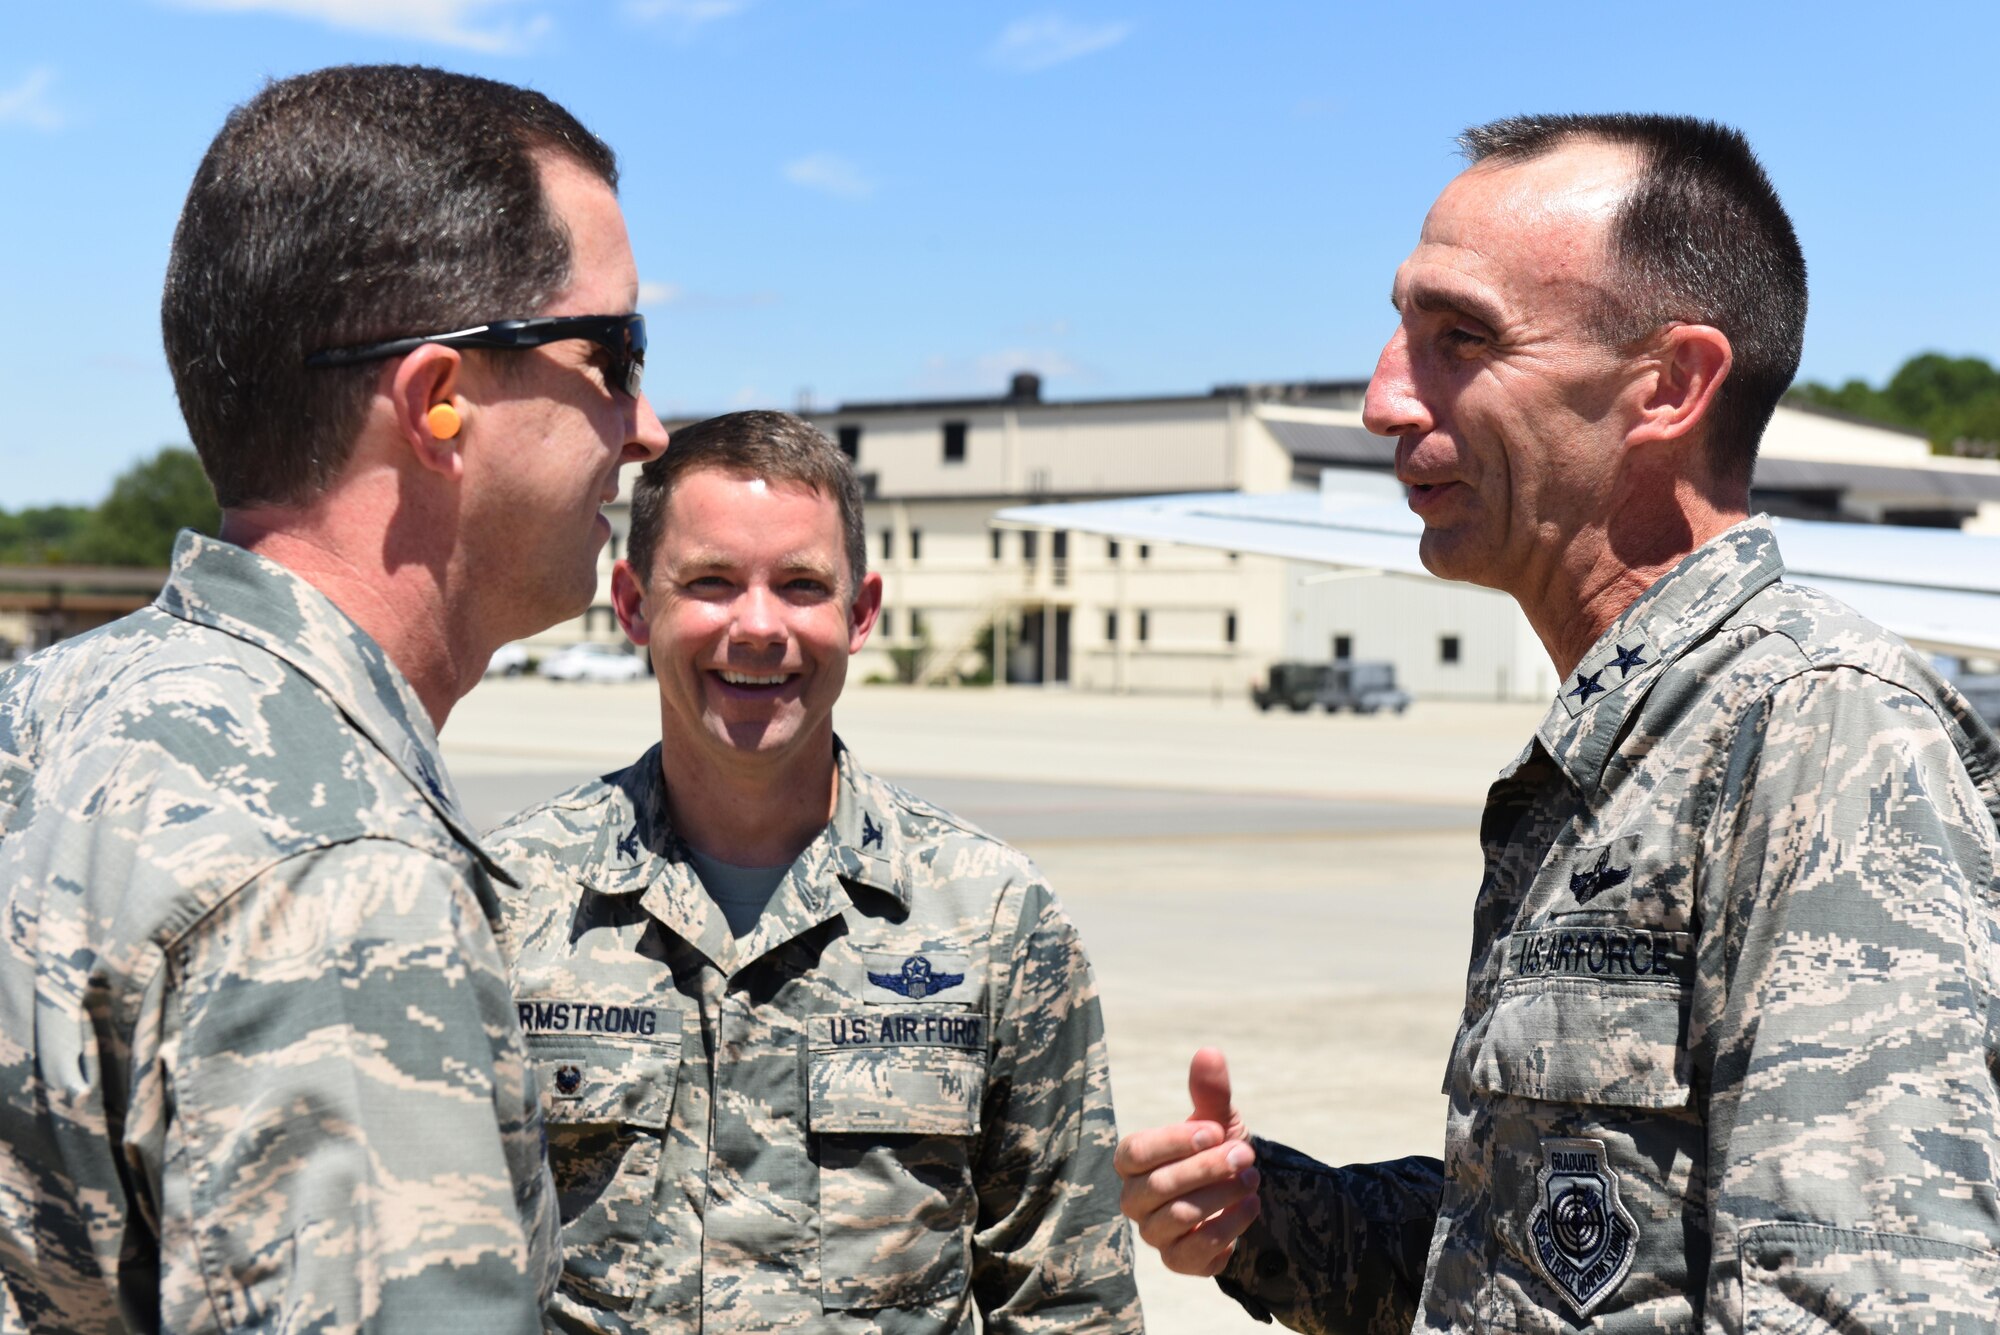 Maj. Gen. Scott Zobrist, Ninth Air Force commander, is greeted by Col. Christopher Sage (left), 4th Fighter Wing commander, and Col. Brian Armstrong (center), 4th FW vice commander, Aug. 22, 2016, at Seymour Johnson Air Force Base, North Carolina. Zobrist toured Seymour Johnson AFB with base and squadron commanders to hear their mission, goals and obstacles. (U.S. Air Force photo by Airman 1st Class Ashley Williamson)